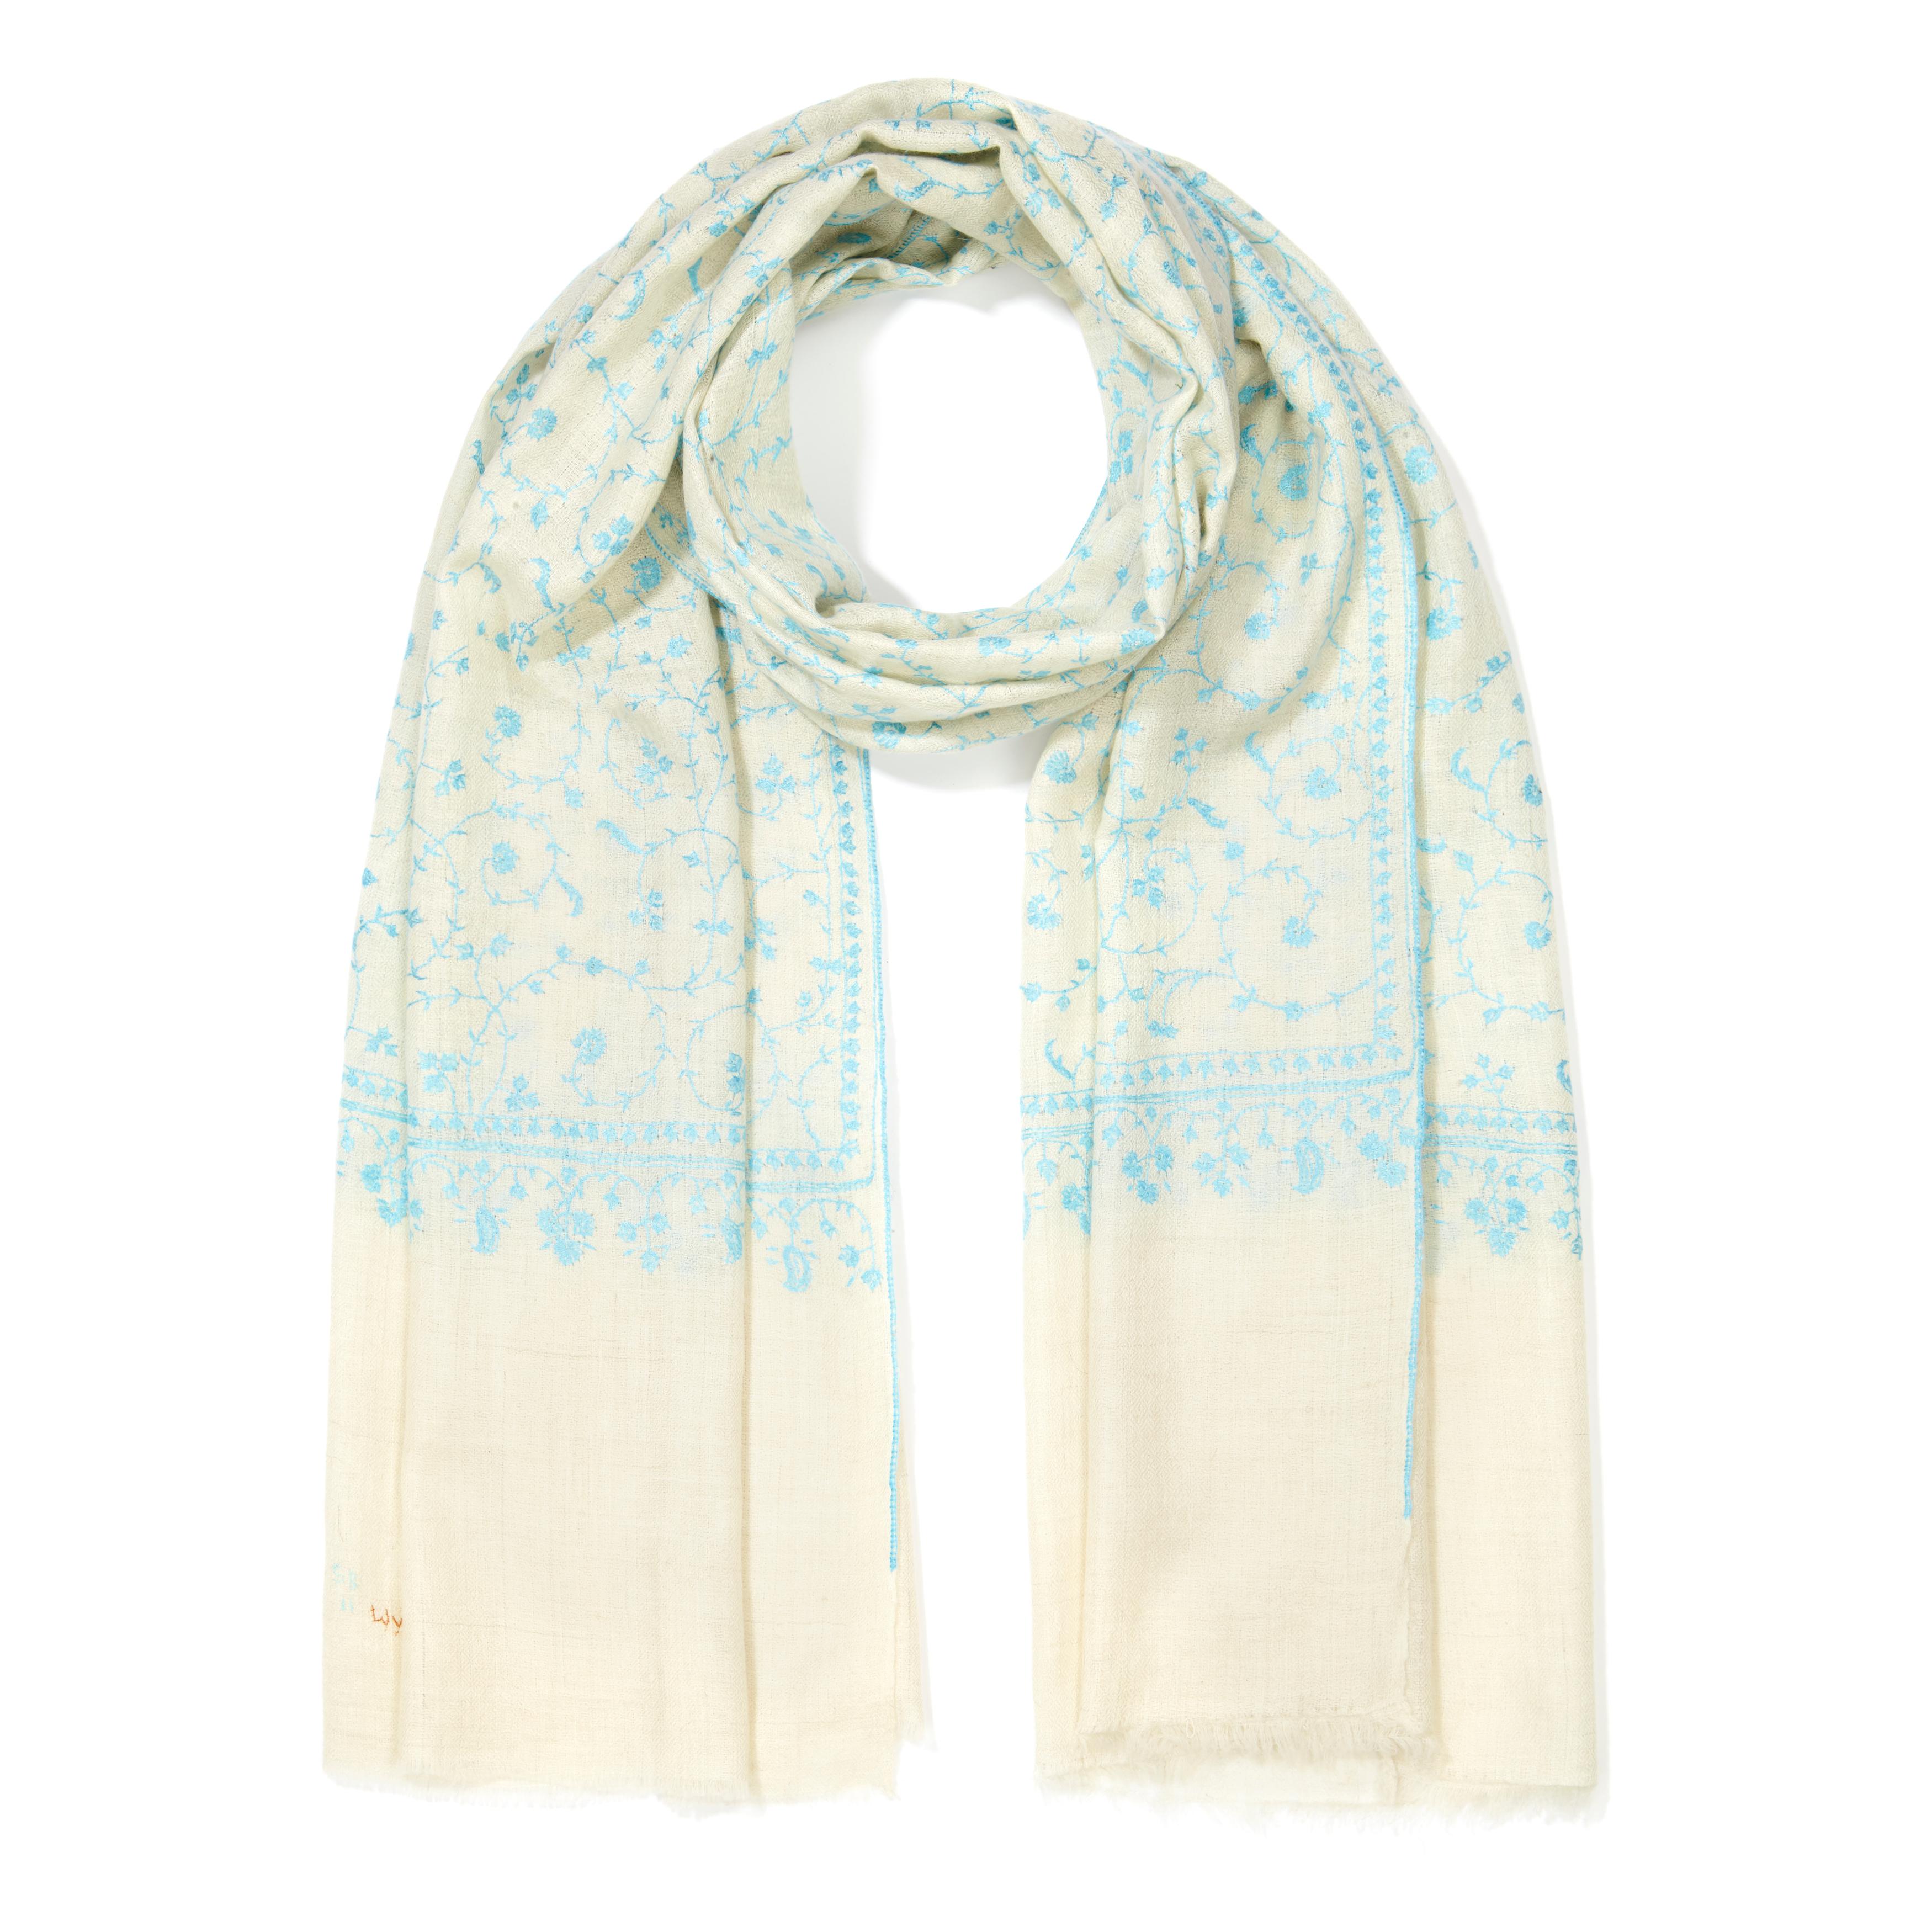 Limited Edition Hand Embroidered Cashmere Shawl in Ivory & Blue Made in Kashmir im Zustand „Neu“ in London, GB